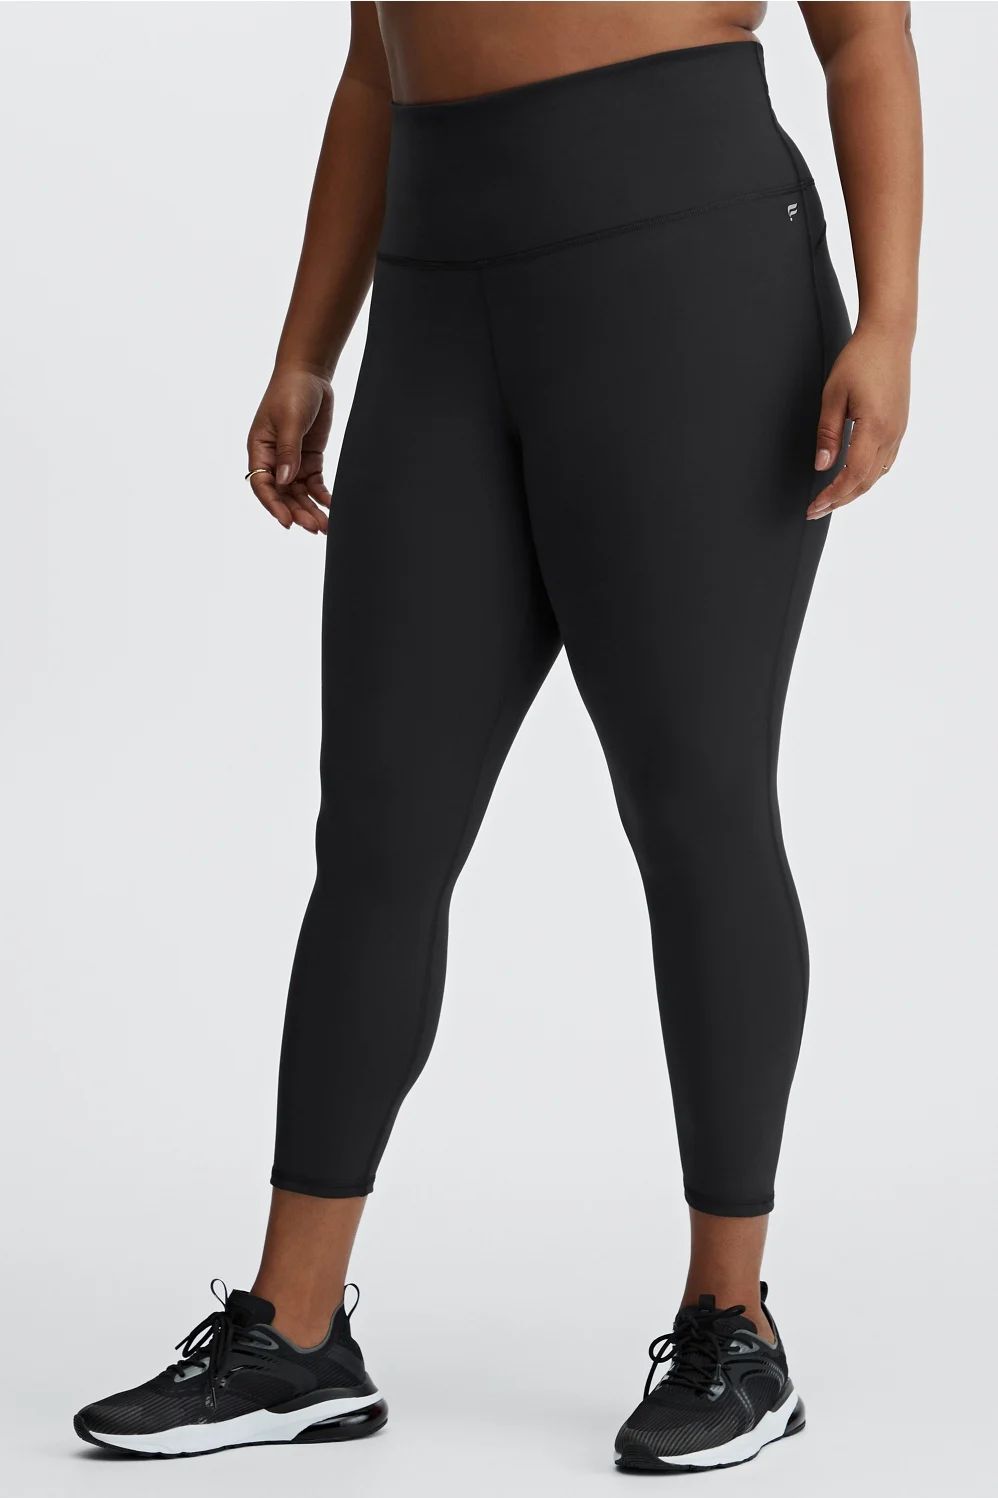 PureLuxe Ultra High-Waisted 7/8 Legging | Fabletics - North America